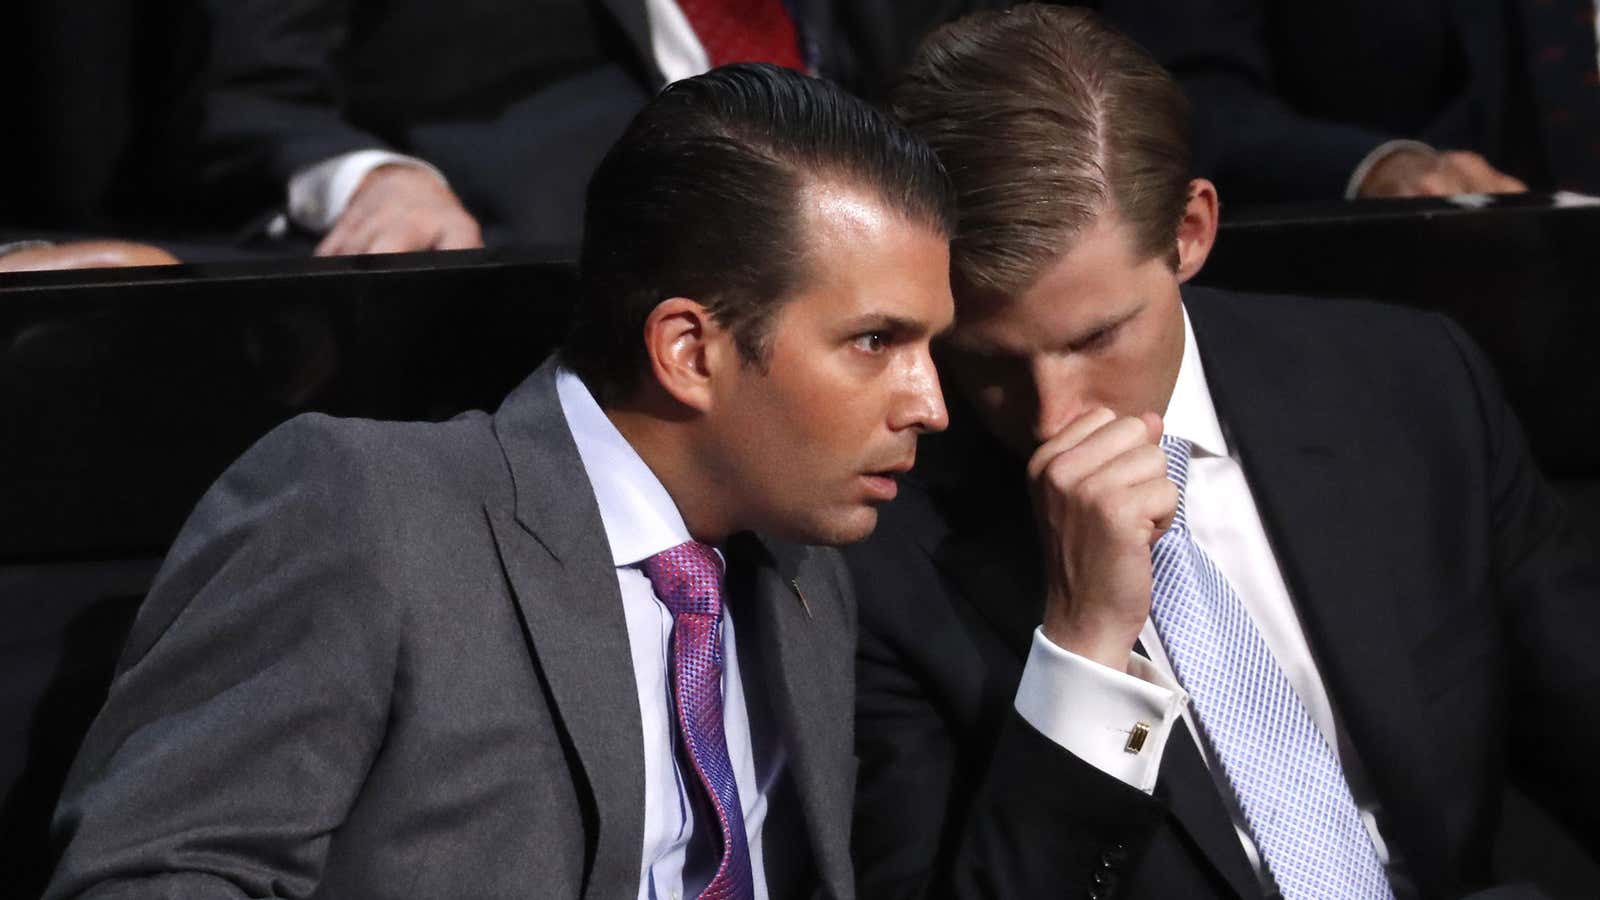 Trump’s sons Eric and Donald Jr. see opportunities for the family business.